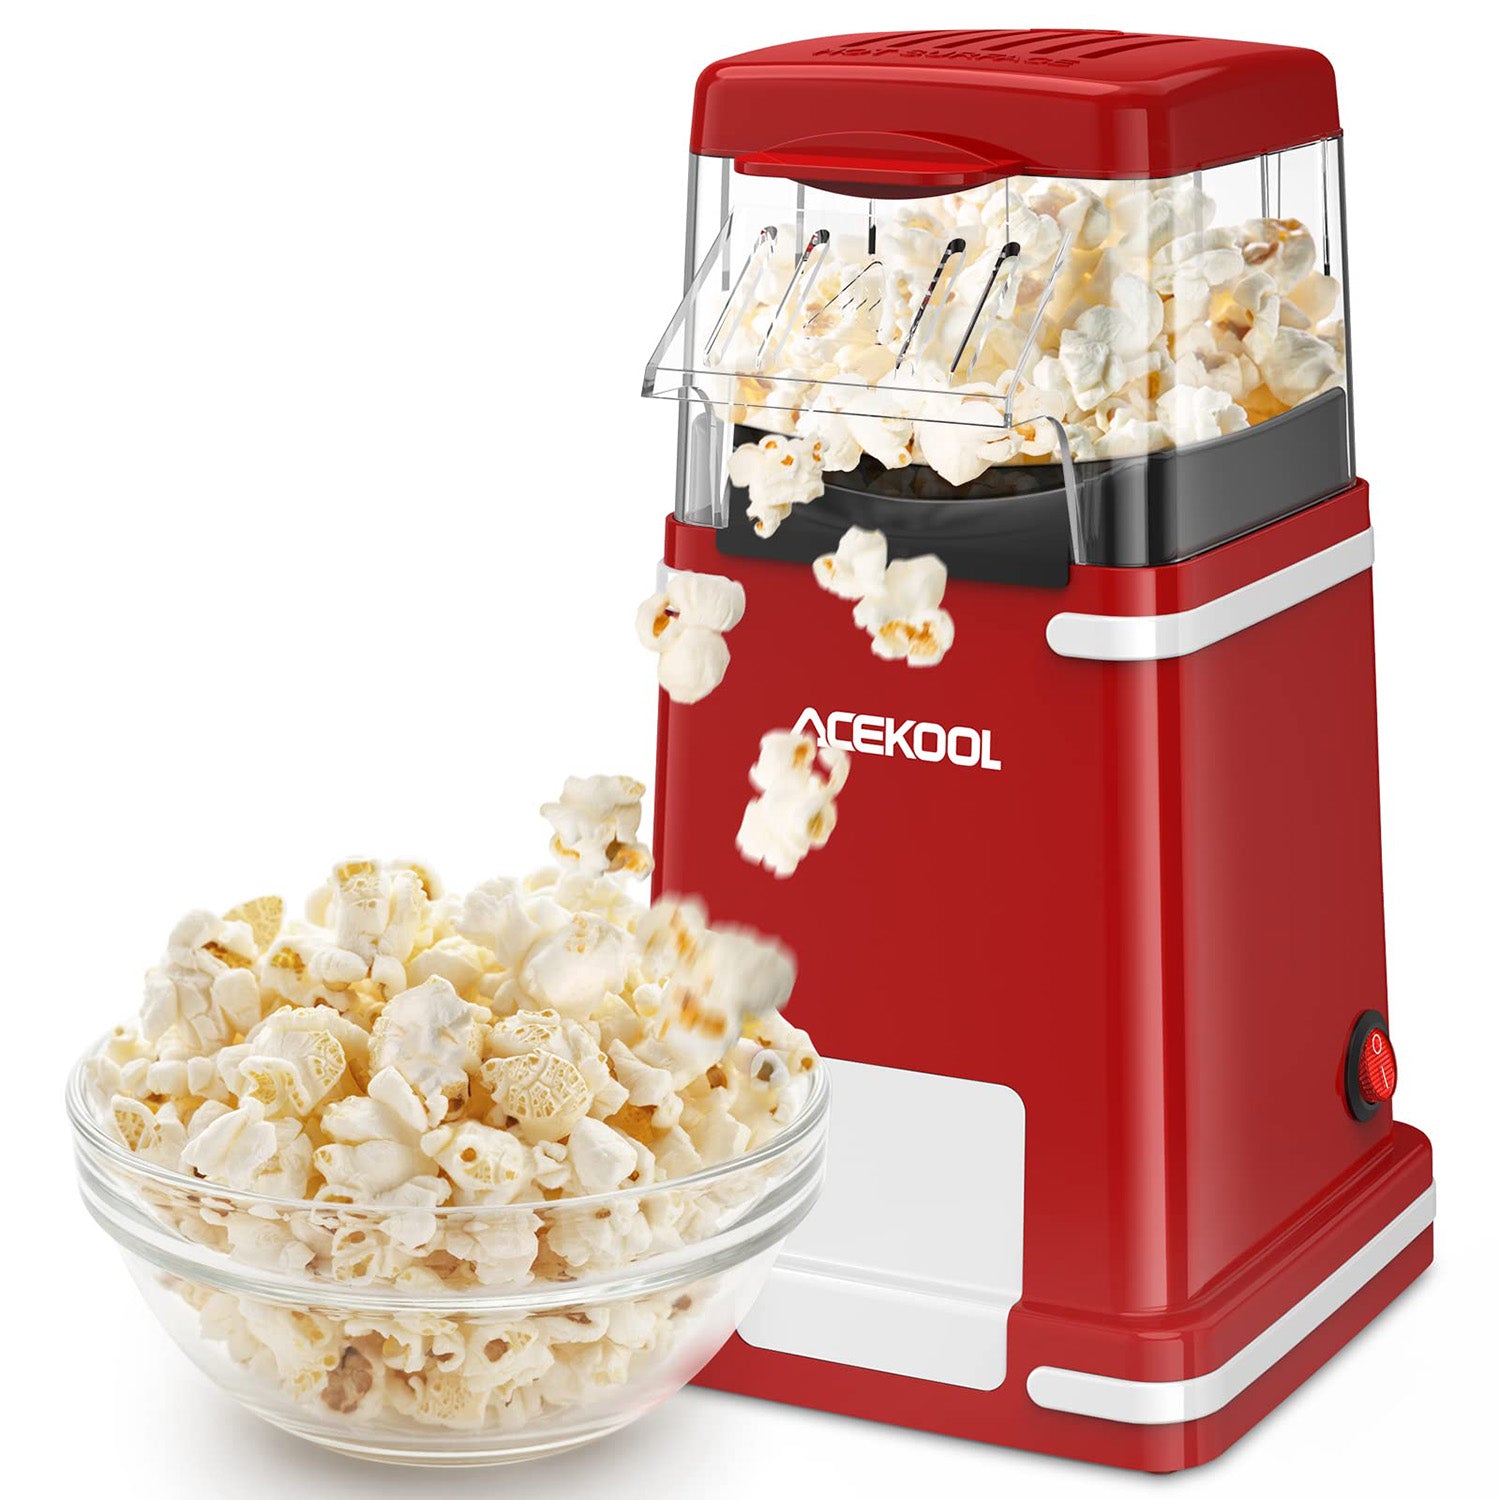 Hot Air Popper Popcorn Maker with 2 Popcorn Boxes for Home, 1200W Air  Popcorn Popper, BPA Free Small Popcorn Maker, No Oil 2 Minutes Fast Air  Popped Popcorn Maker, ETL Certified Mini